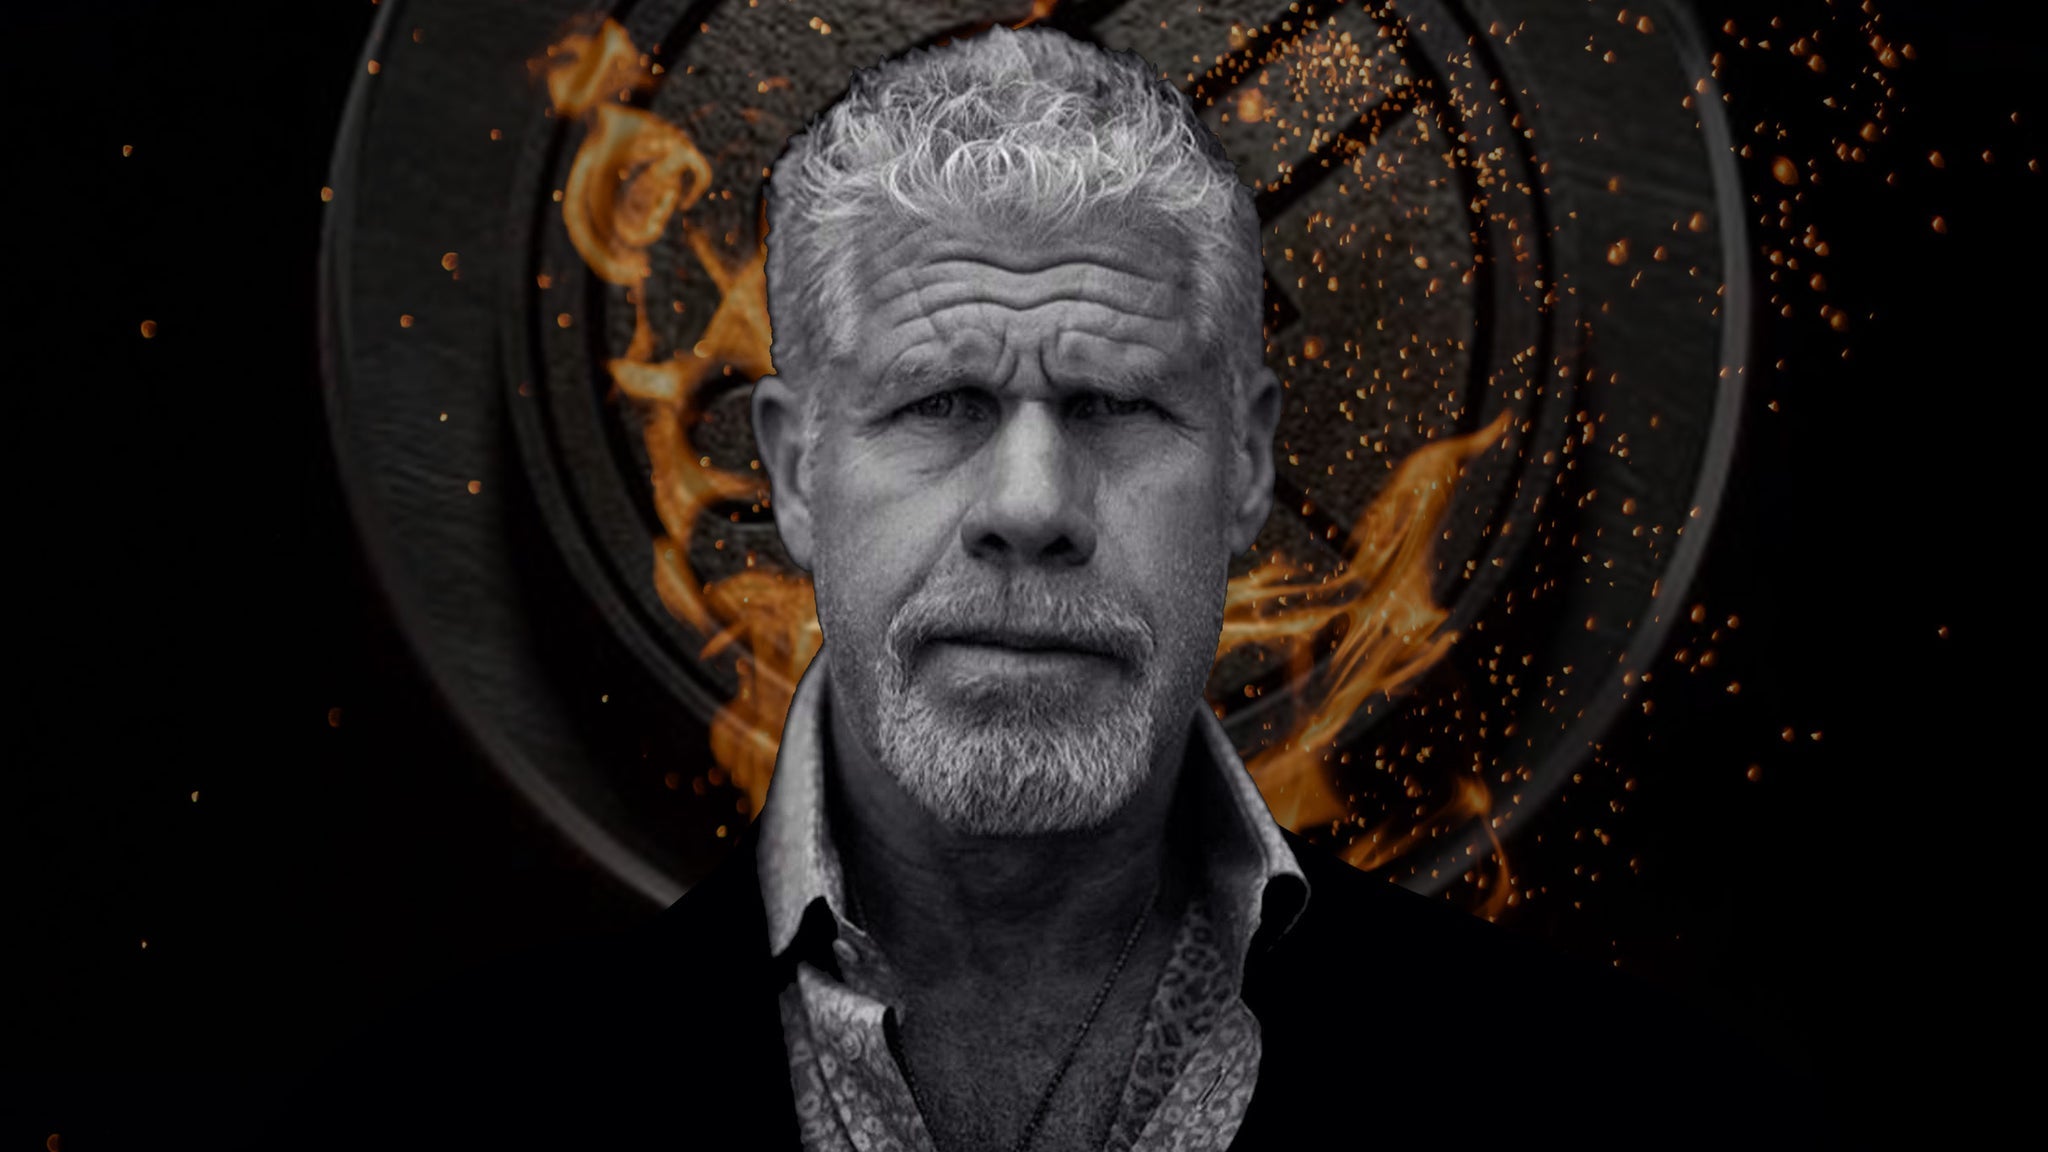 A Live Conversation with Ron Perlman plus a screening of Hellboy  presale code